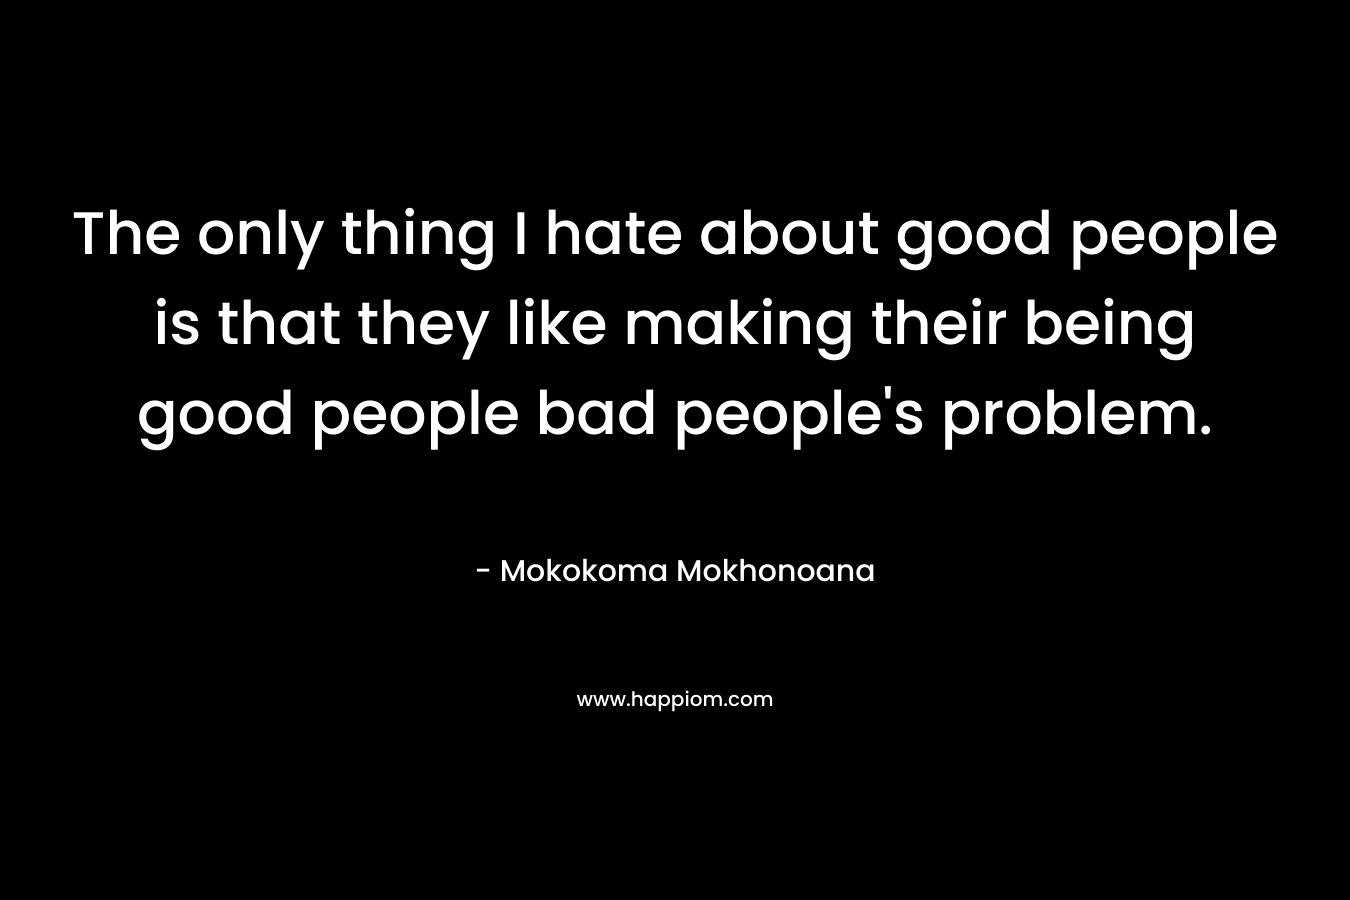 The only thing I hate about good people is that they like making their being good people bad people's problem.